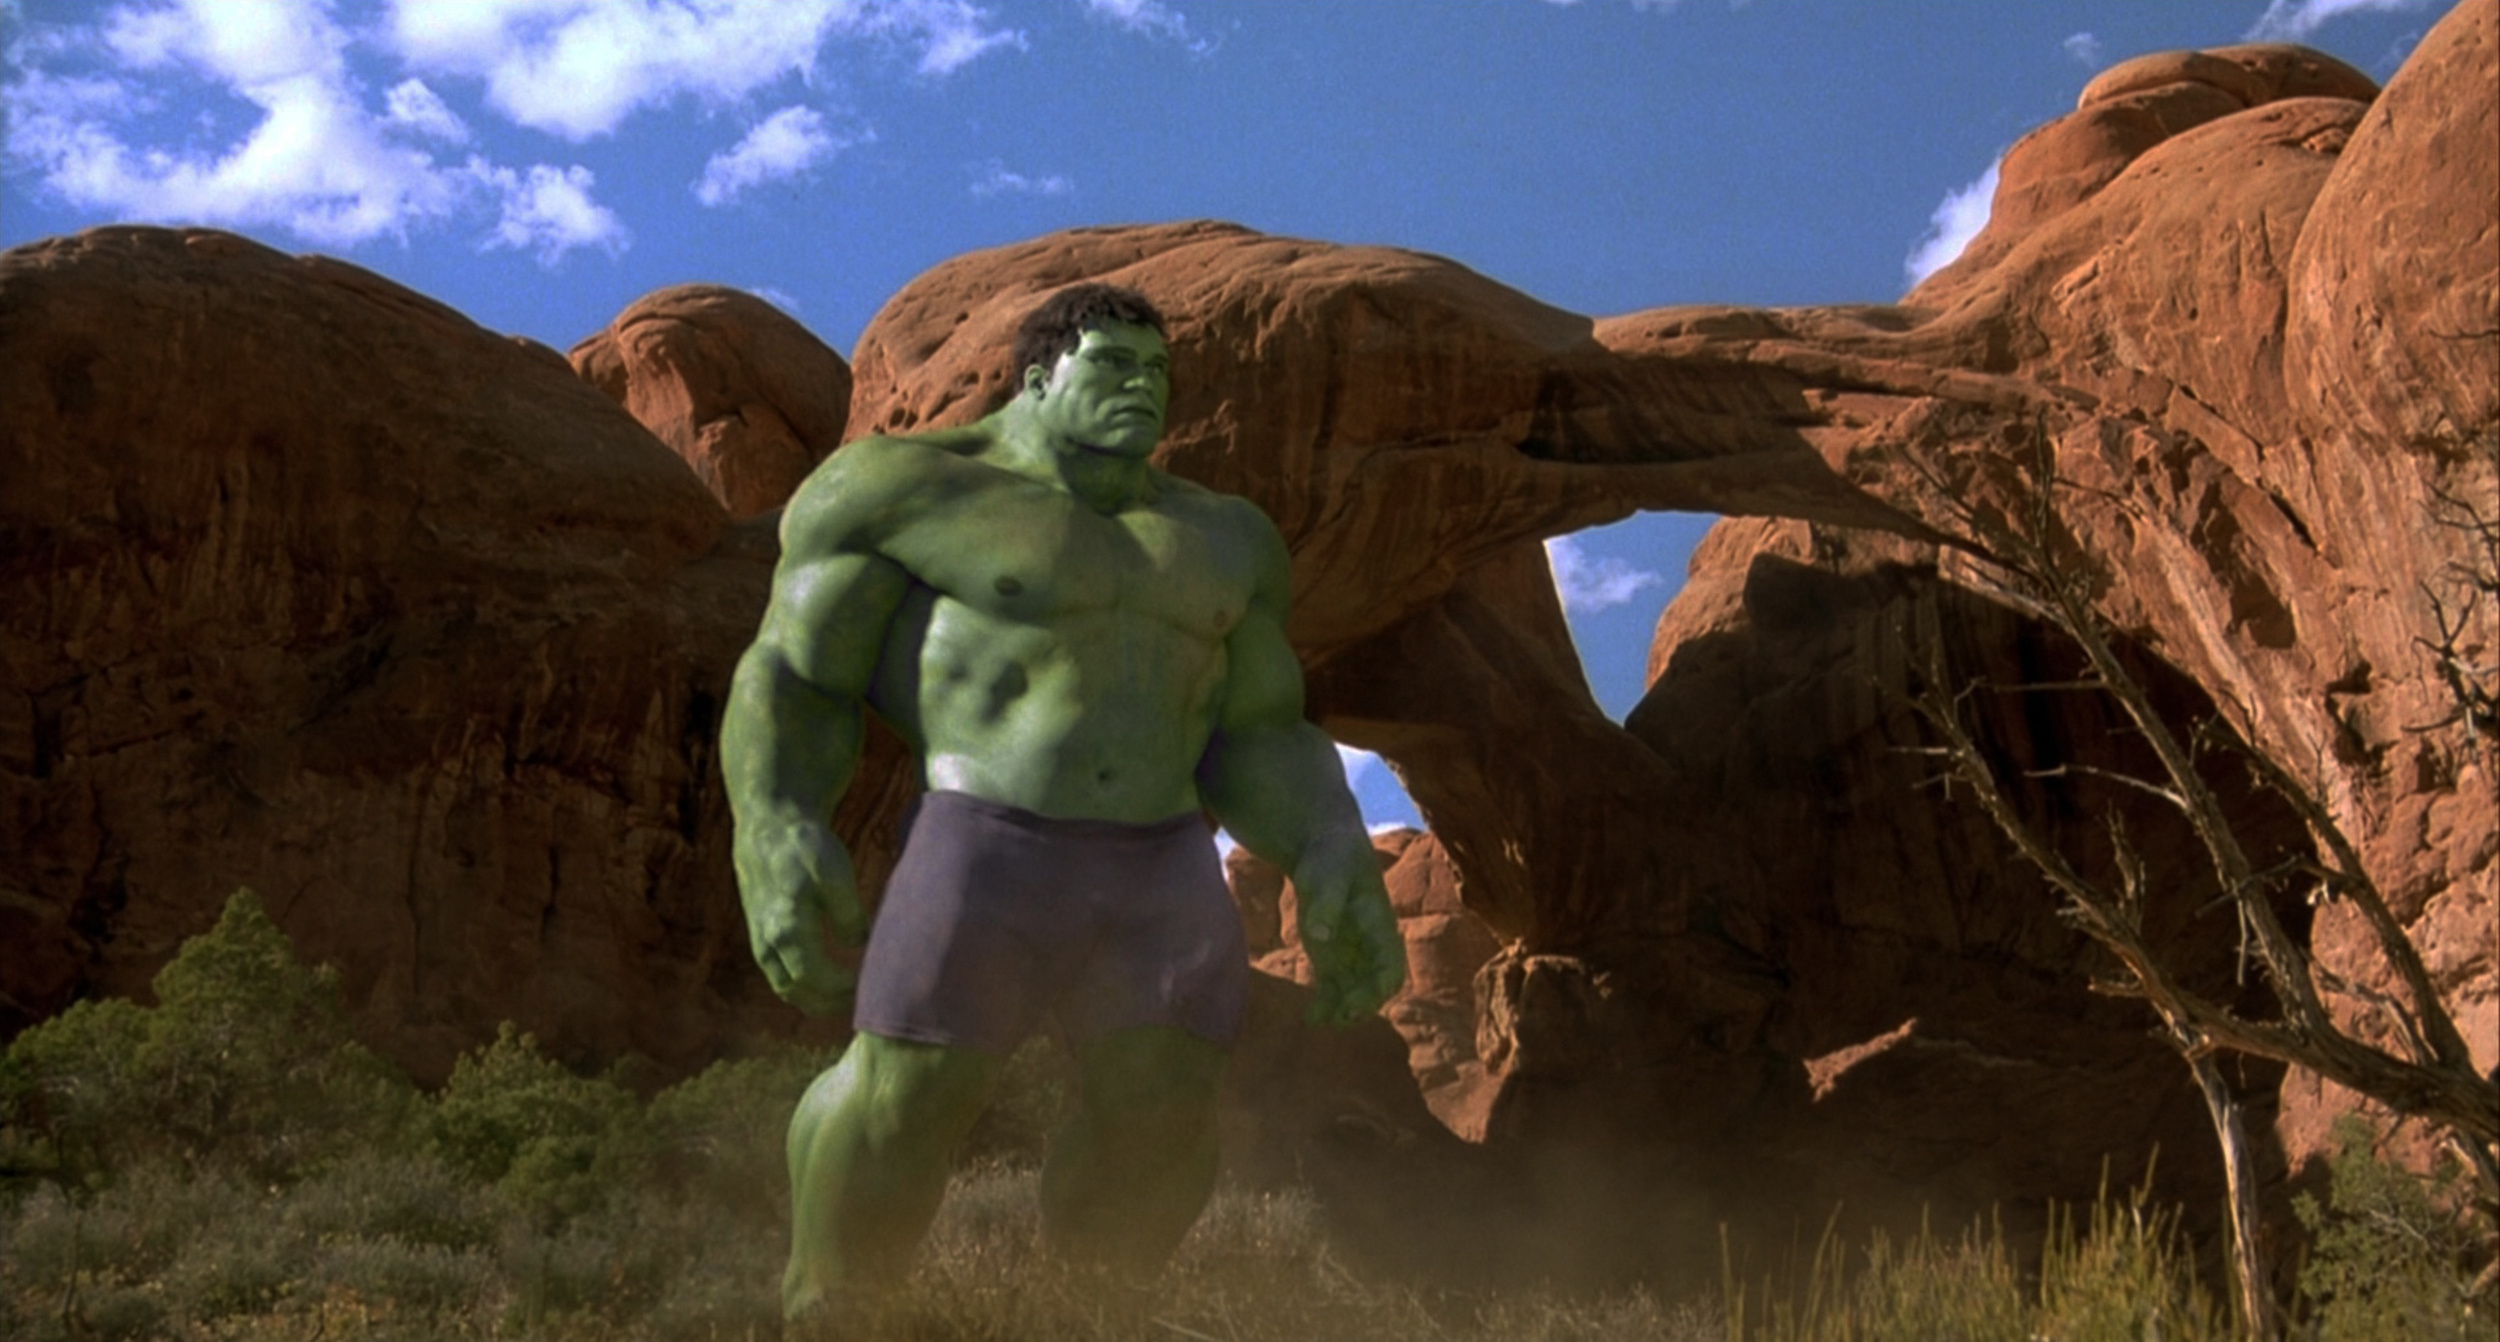 <p>Zak Penn was given a pass on the <em>Hulk</em> script once Hensleigh was signed on as the director. He didn’t end up with a credit, but he would make good use of his time on <em>Hulk</em>. Penn has a "story by" credit on 2008’s <em>The Incredible Hulk</em>, and a couple ideas from his <em>Hulk</em> script ended up in <em>The Incredible Hulk</em> as well.</p><p><a href='https://www.msn.com/en-us/community/channel/vid-cj9pqbr0vn9in2b6ddcd8sfgpfq6x6utp44fssrv6mc2gtybw0us'>Follow us on MSN to see more of our exclusive entertainment content.</a></p>